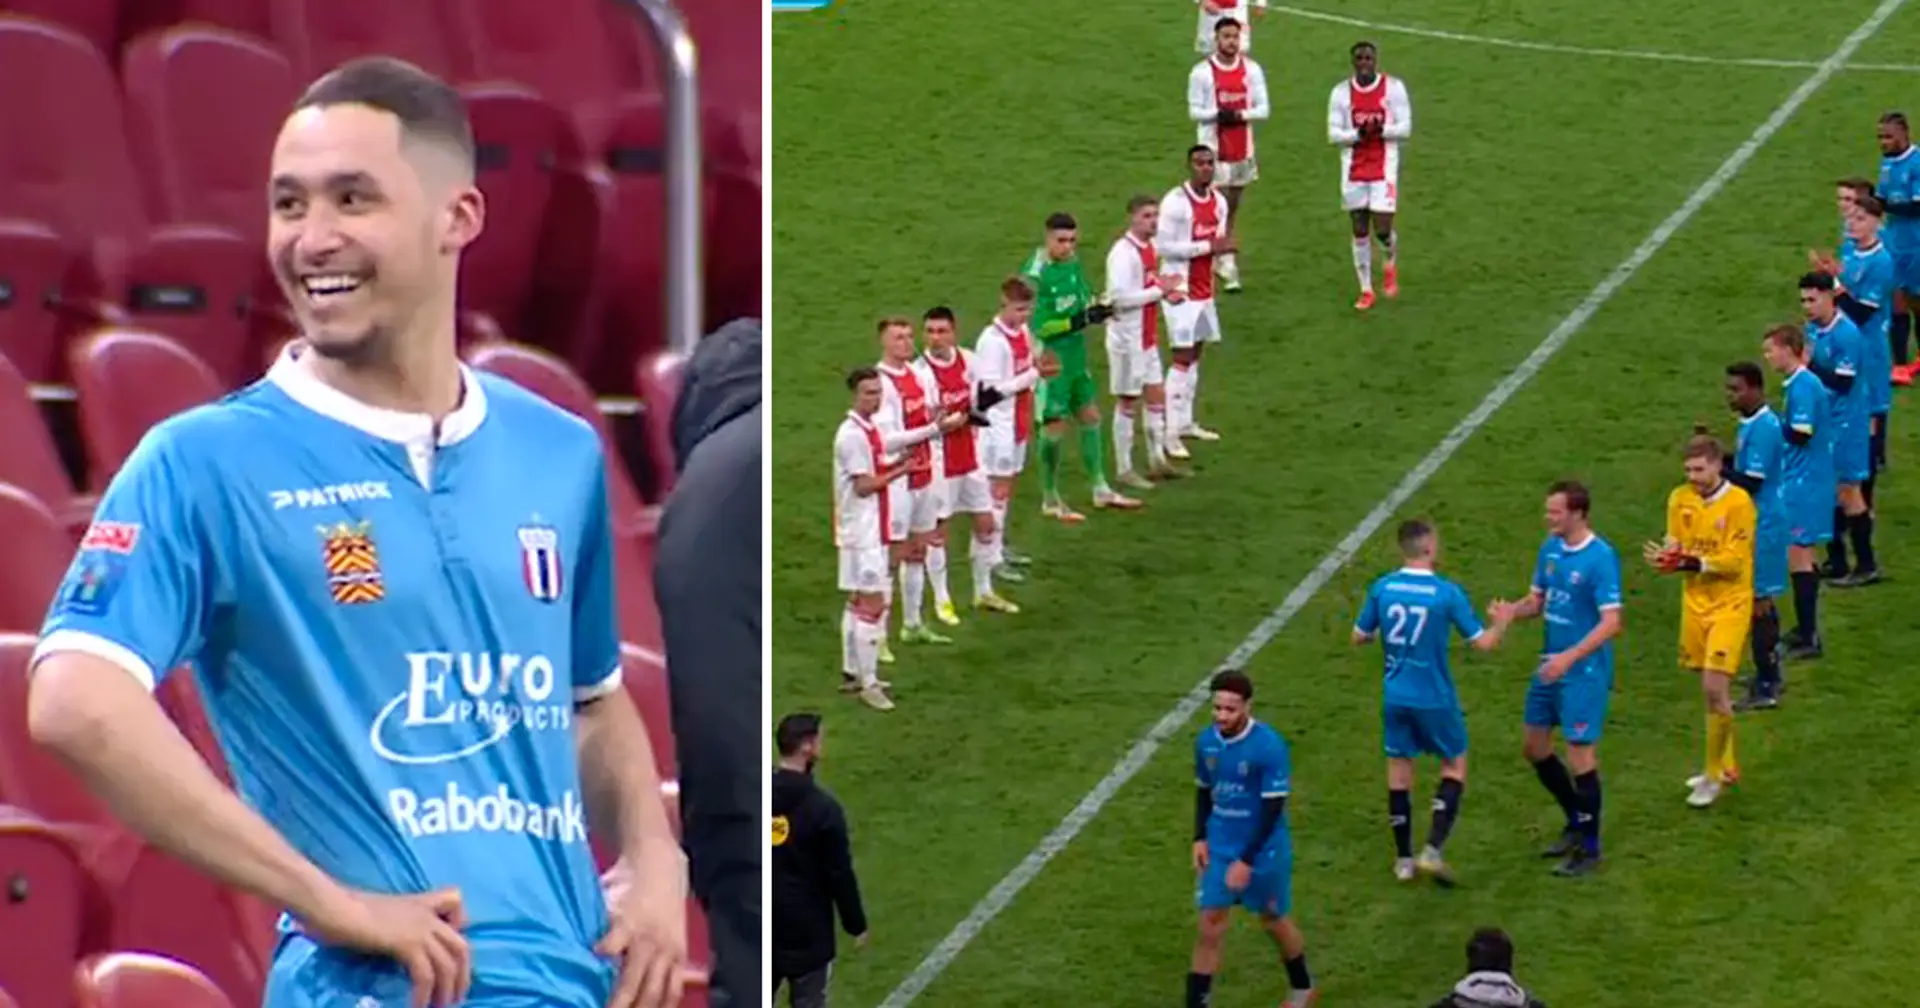 Ajax players give standing ovations to opposition striker who’s fighting cancer on the field